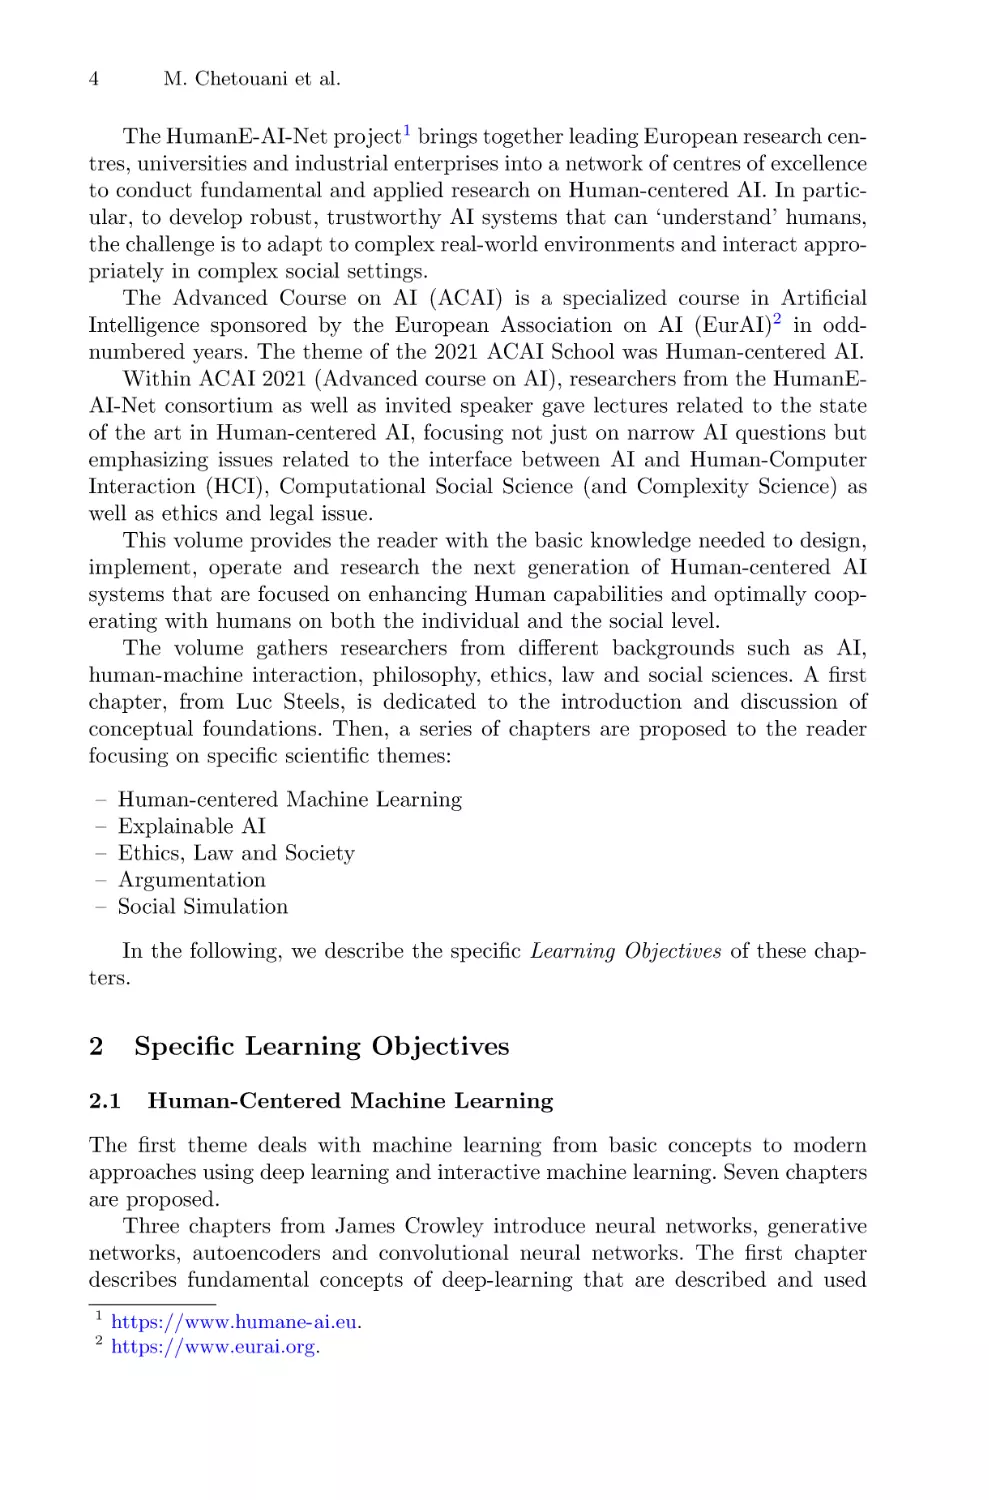 2 Specific Learning Objectives
2.1 Human-Centered Machine Learning